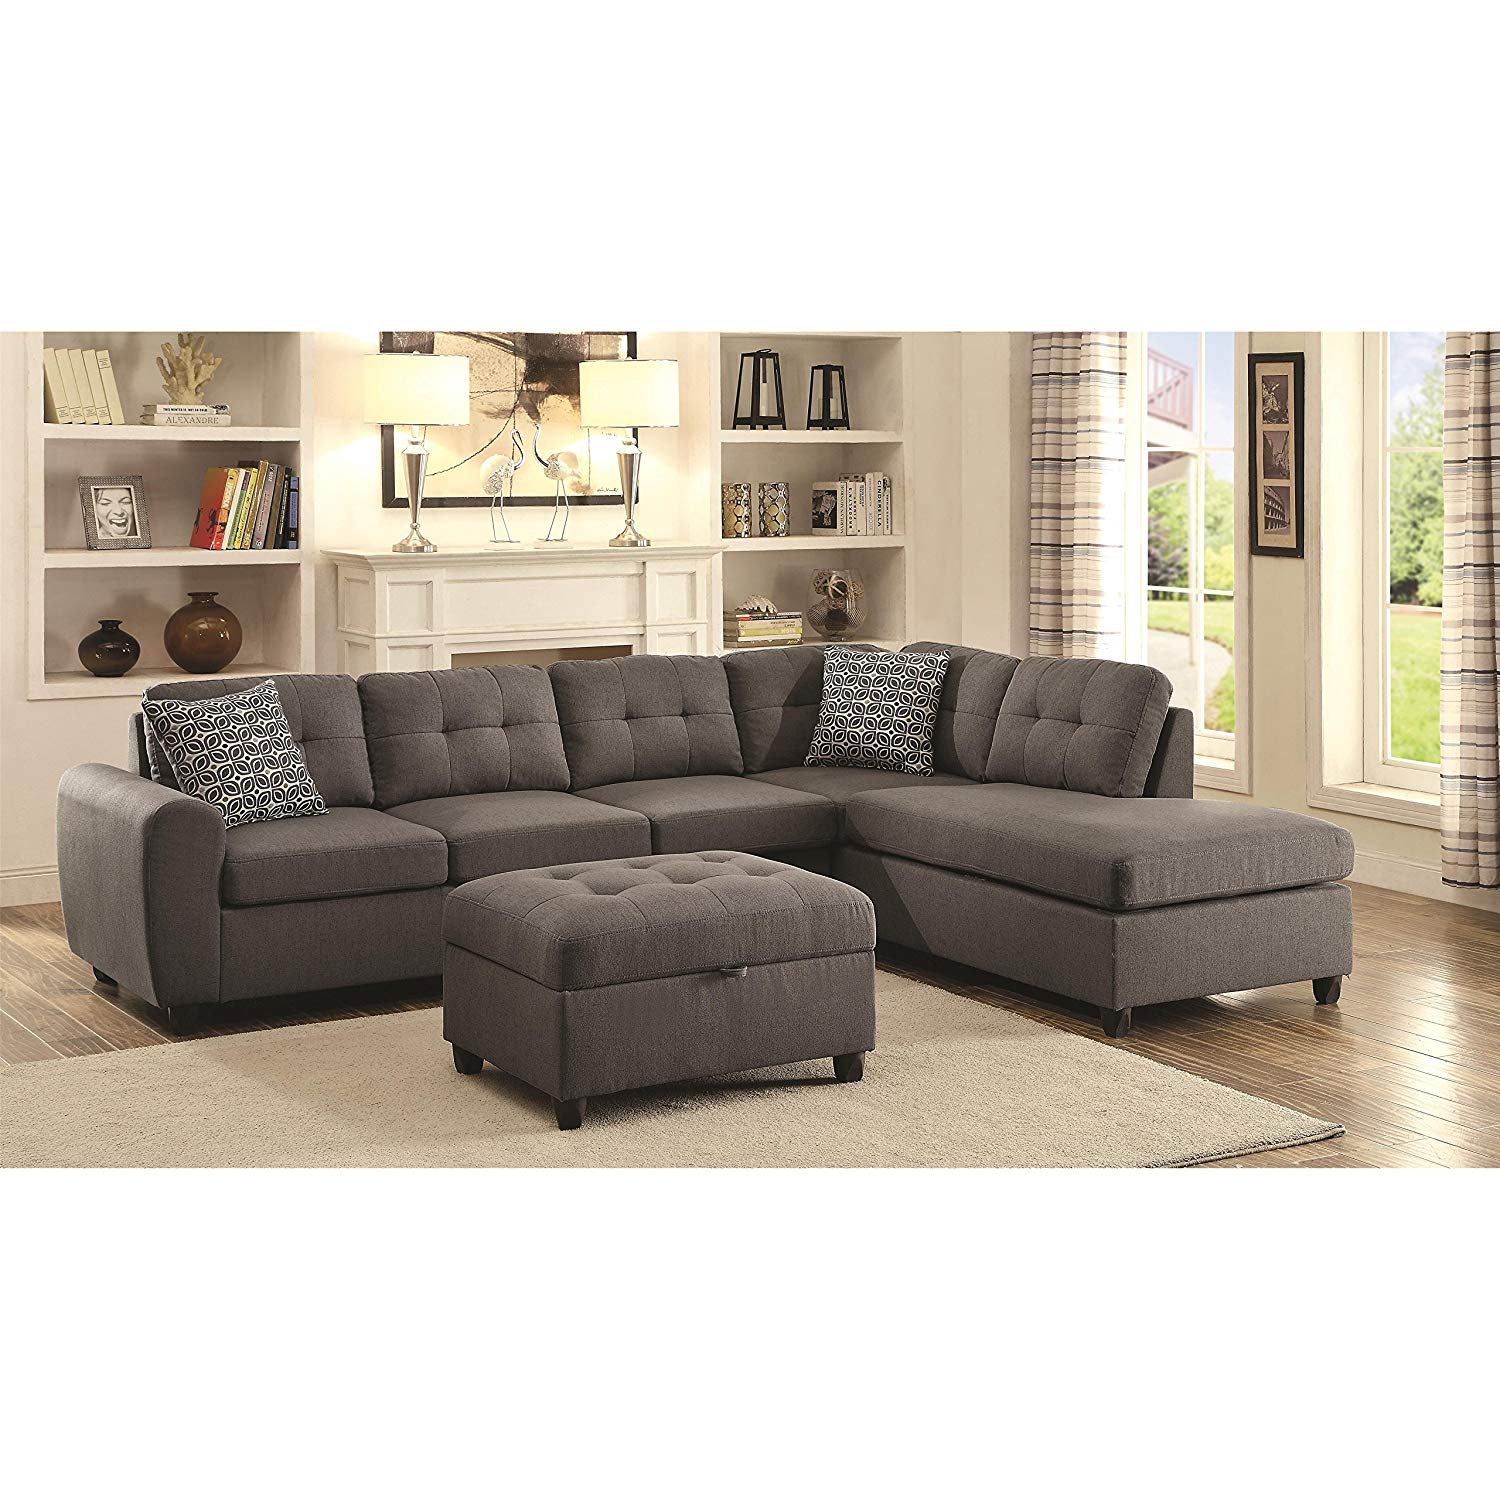 Traveller Location: Coaster Home Furnishings 500413 Living Room Sectional Sofa Grey:  Kitchen & Dining